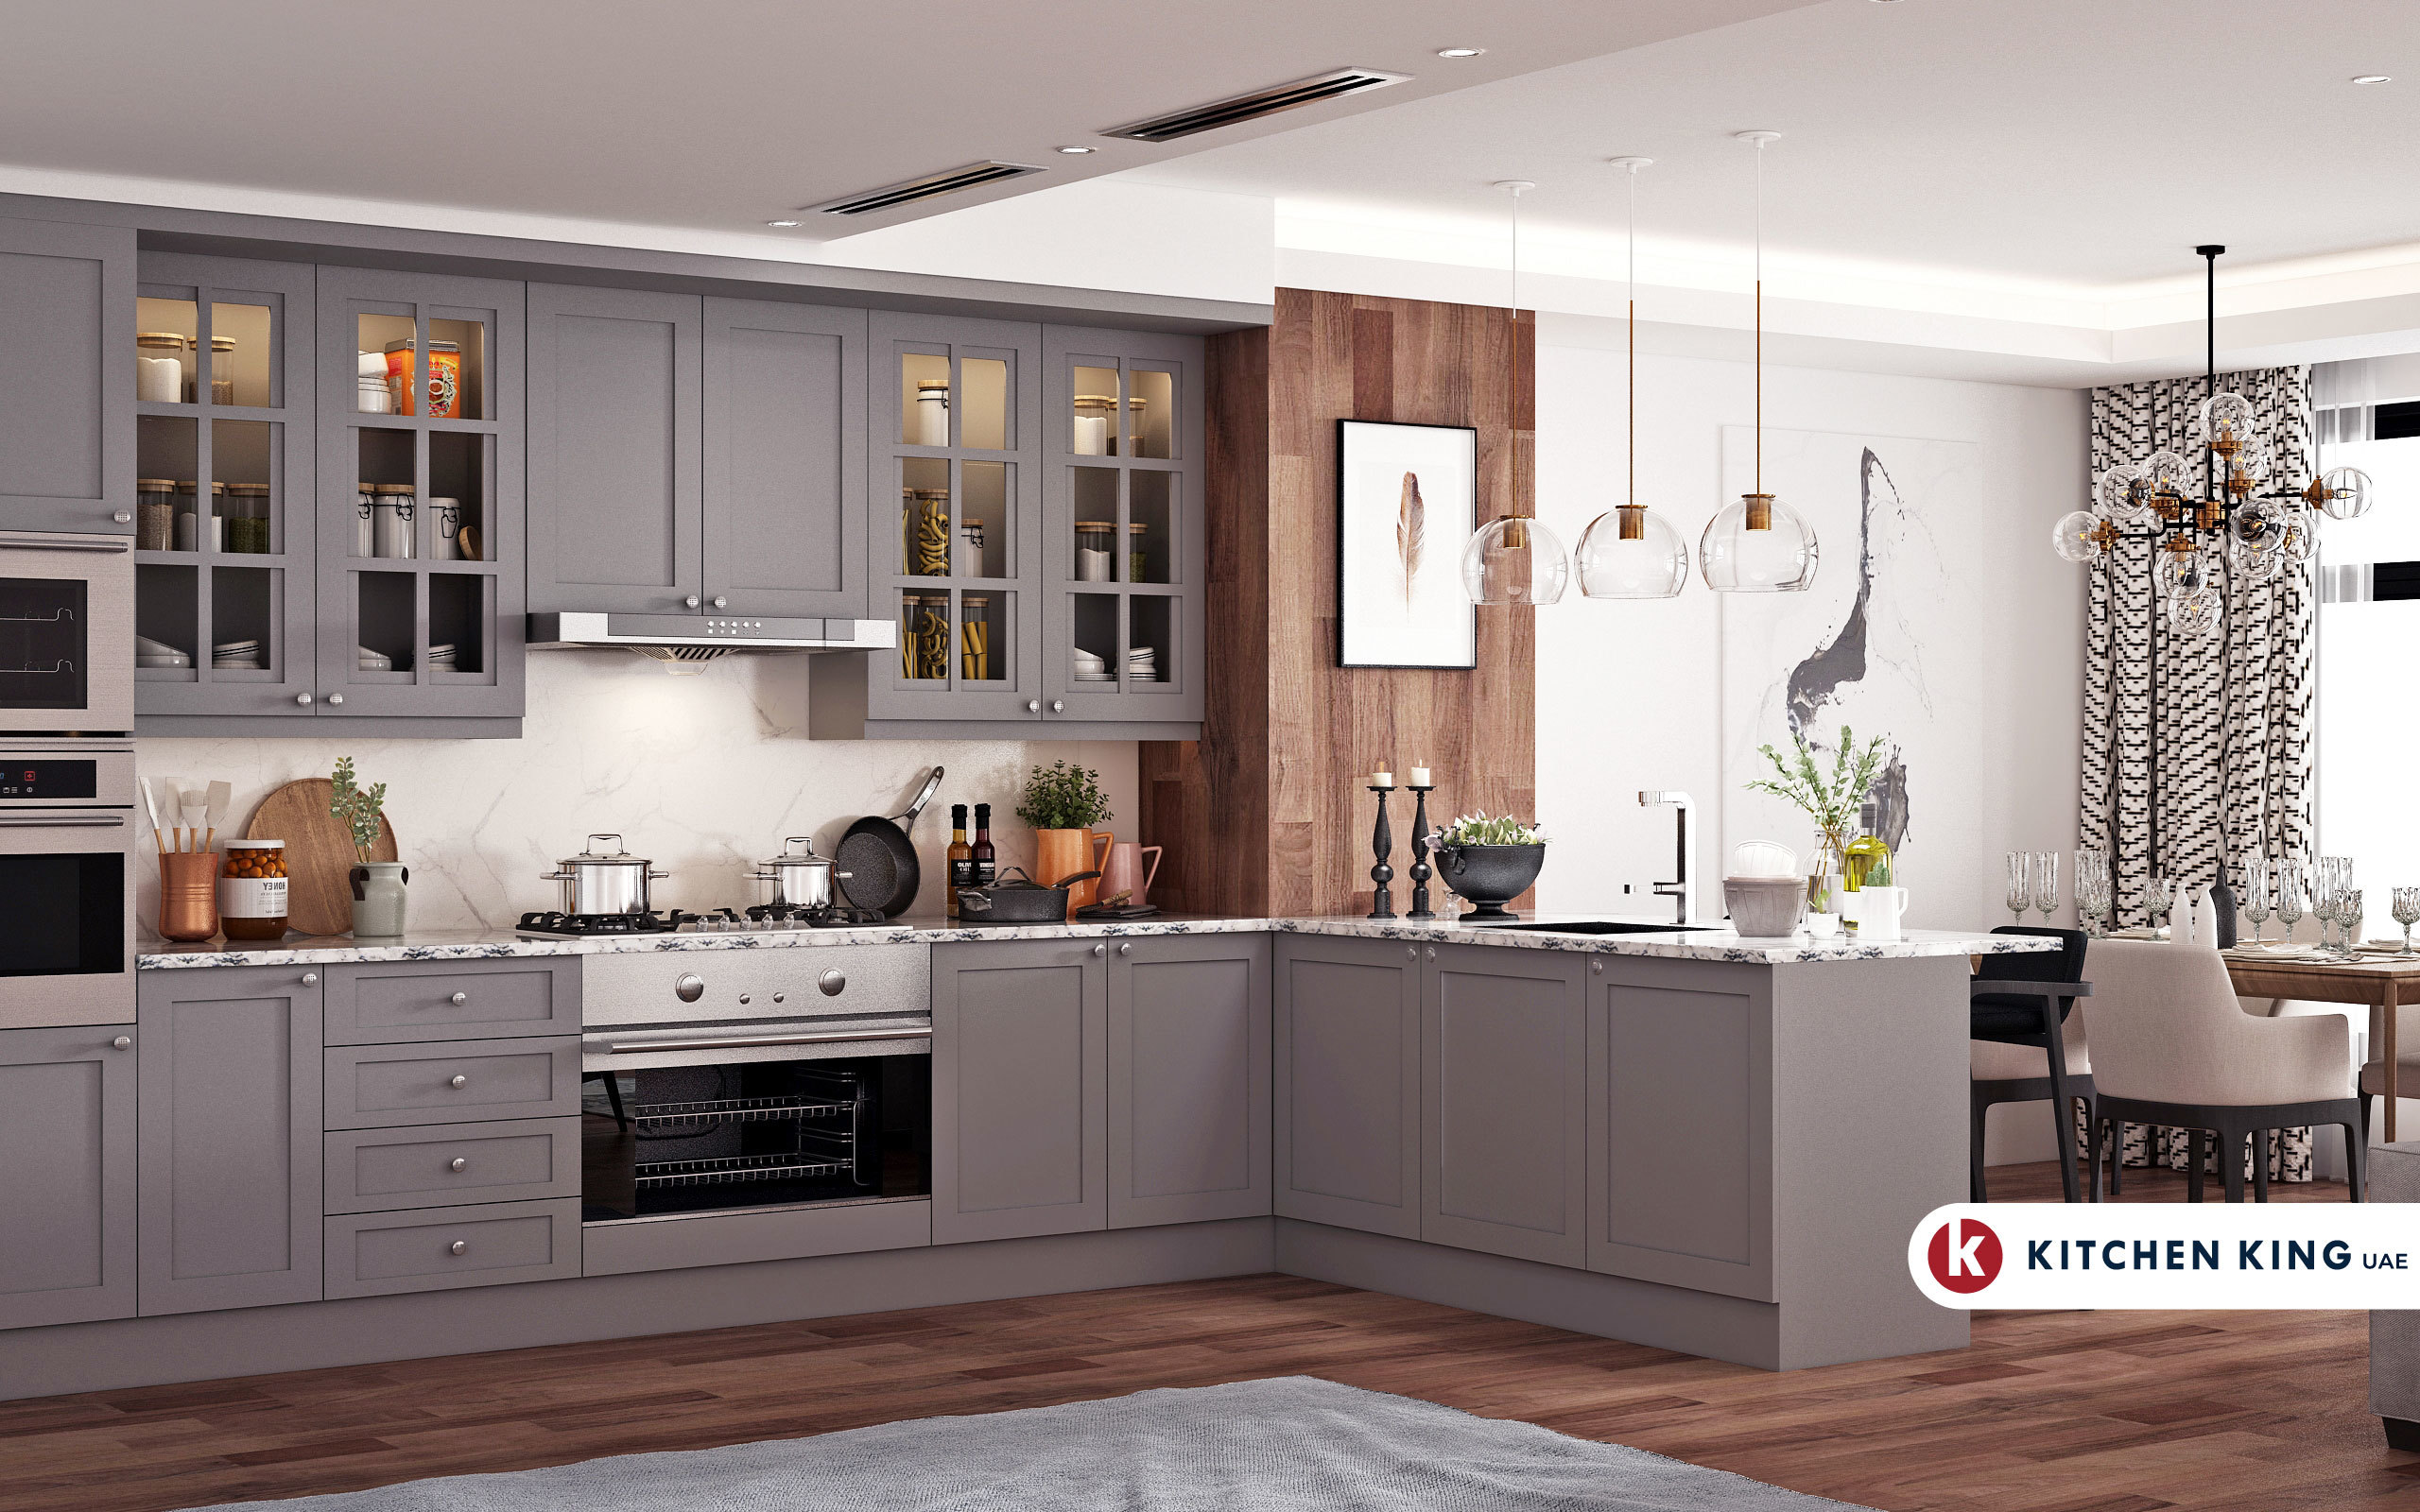 Kitchen Cabinet and Wardrobes design company in UAE | KITCHEN KING